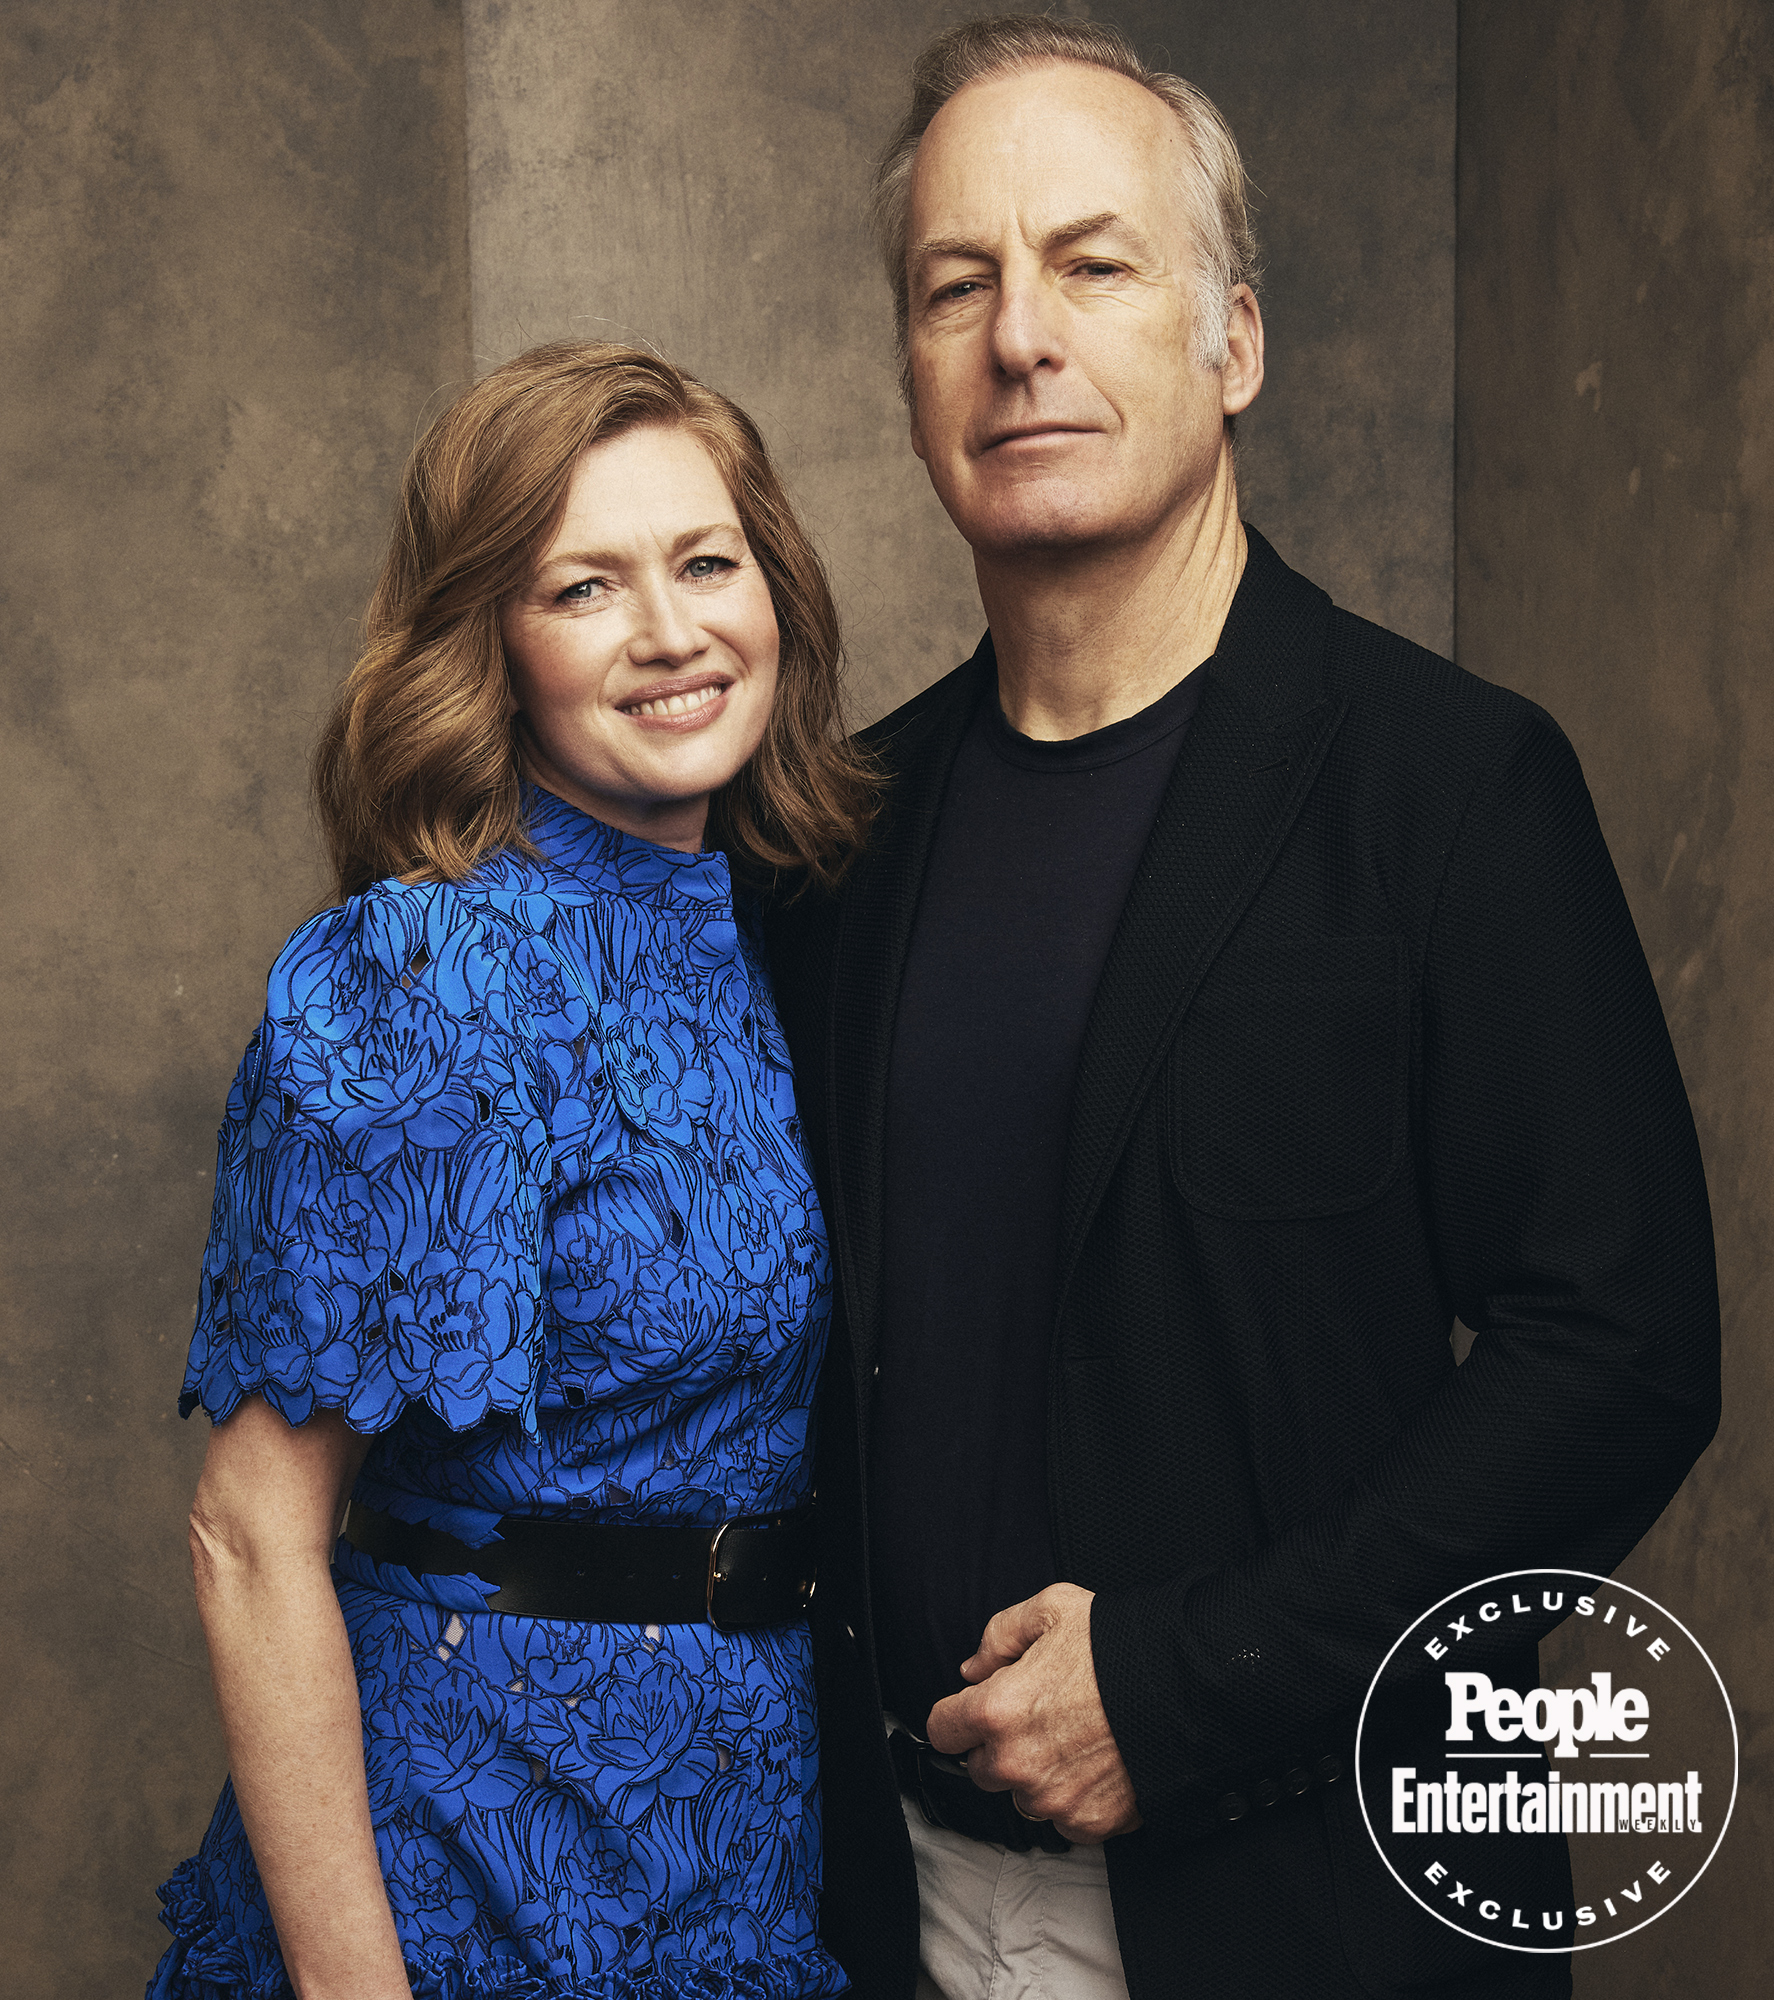 Mireille Enos and Bob Odenkirk of 'Lucky Hank' pose for a portrait at the SXSW Film Festival